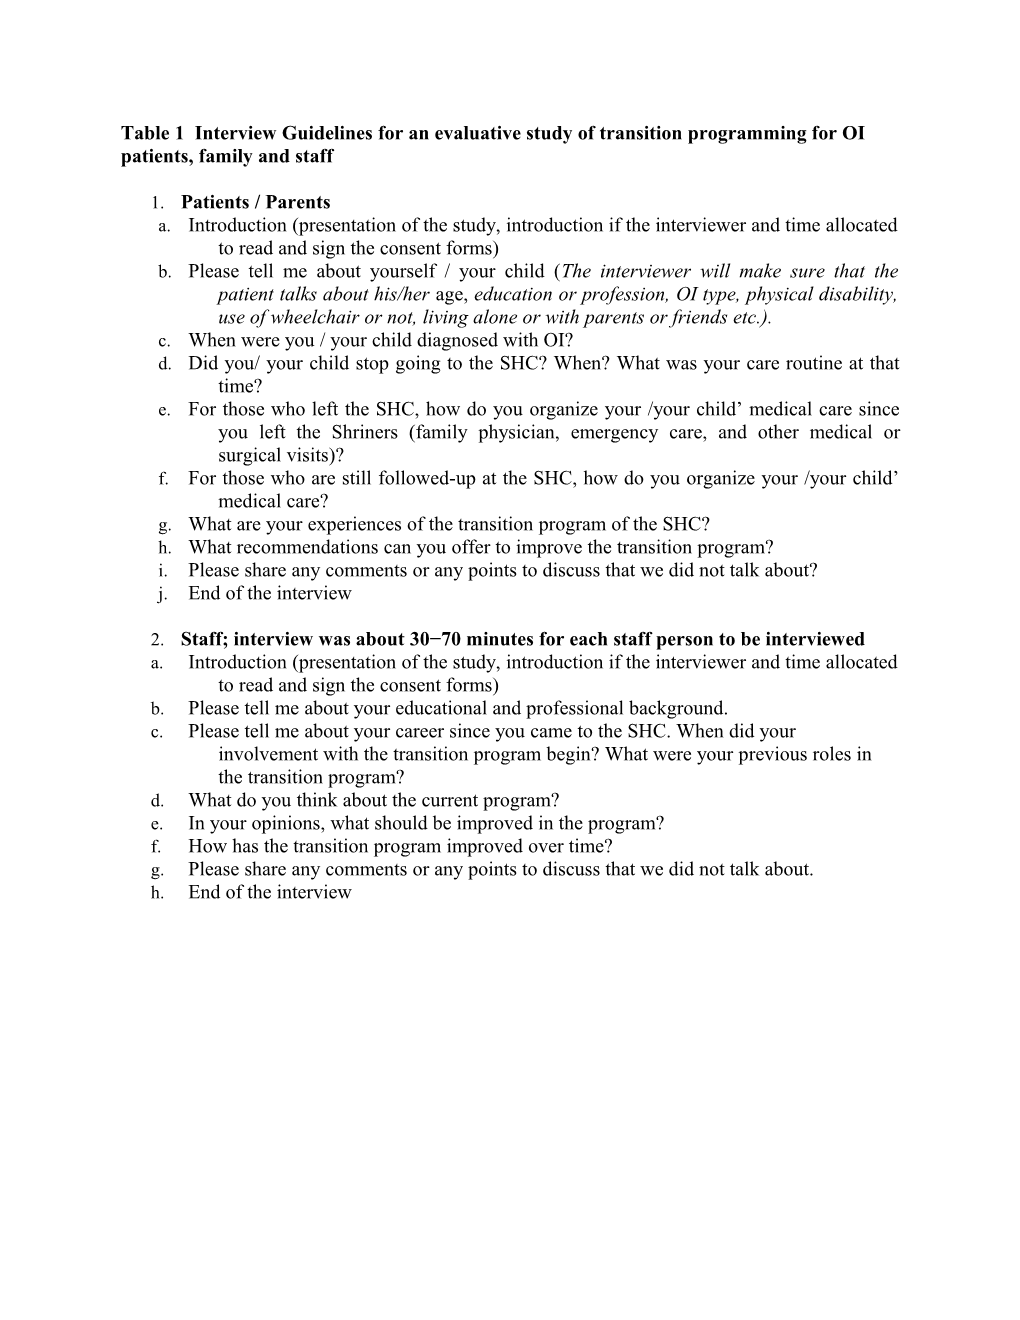 Table 1 Interview Guidelines for an Evaluative Study of Transition Programming for OI